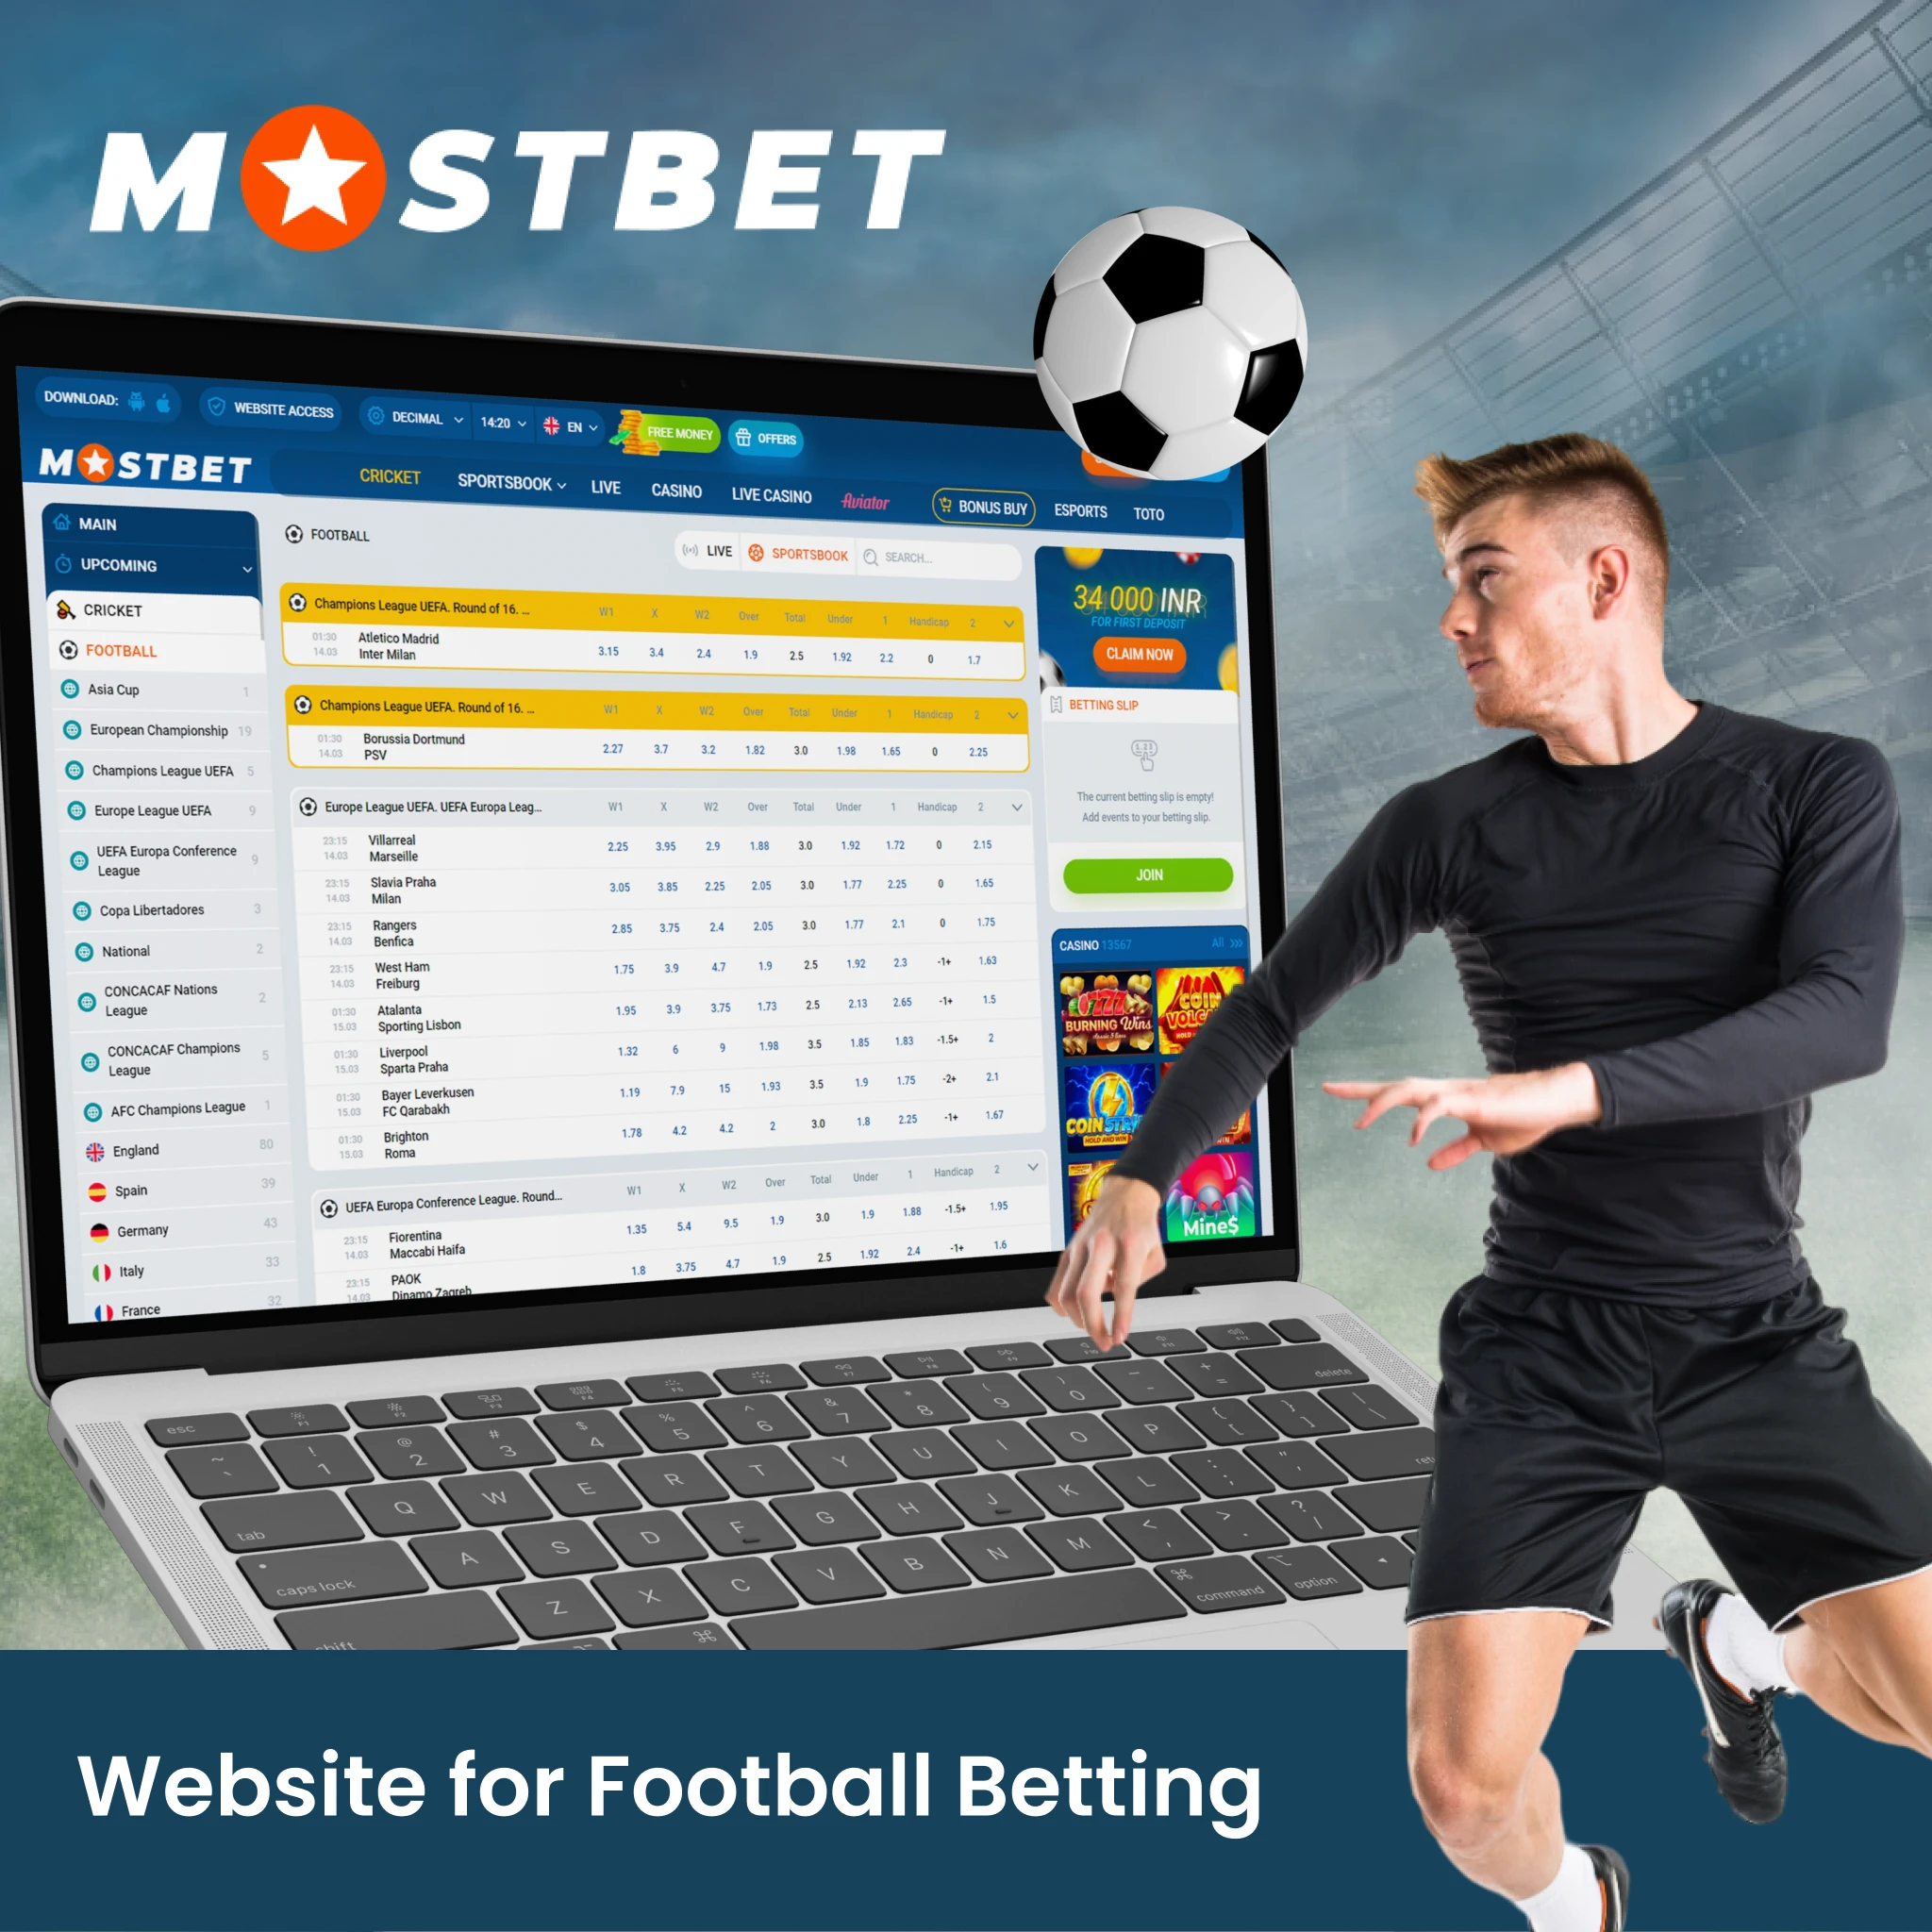 Mostbet provides access to a wide variety of football tournaments.